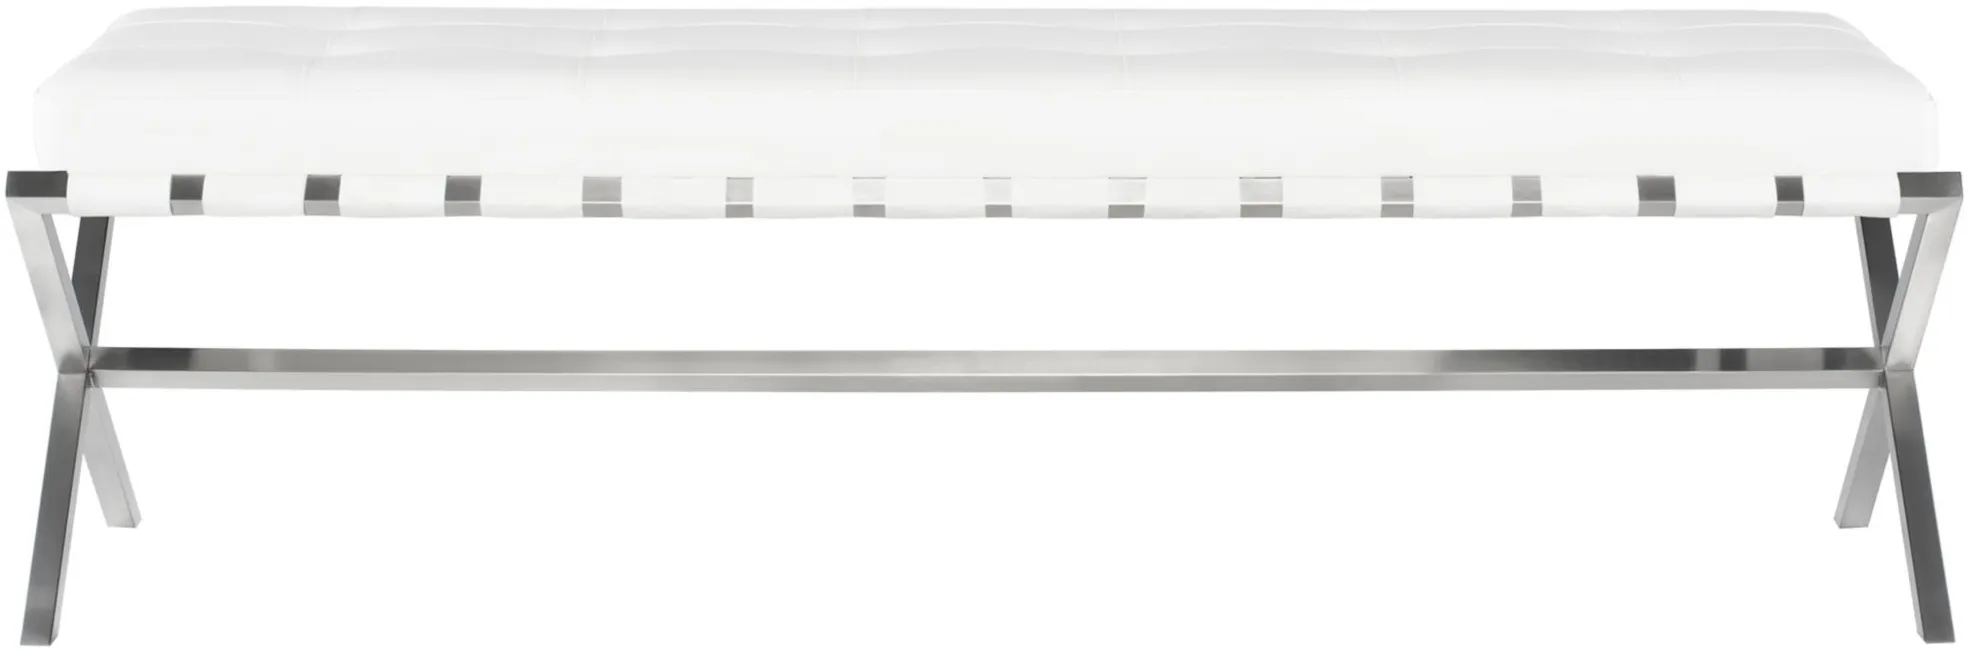 Auguste Occasional Bench in WHITE by Nuevo